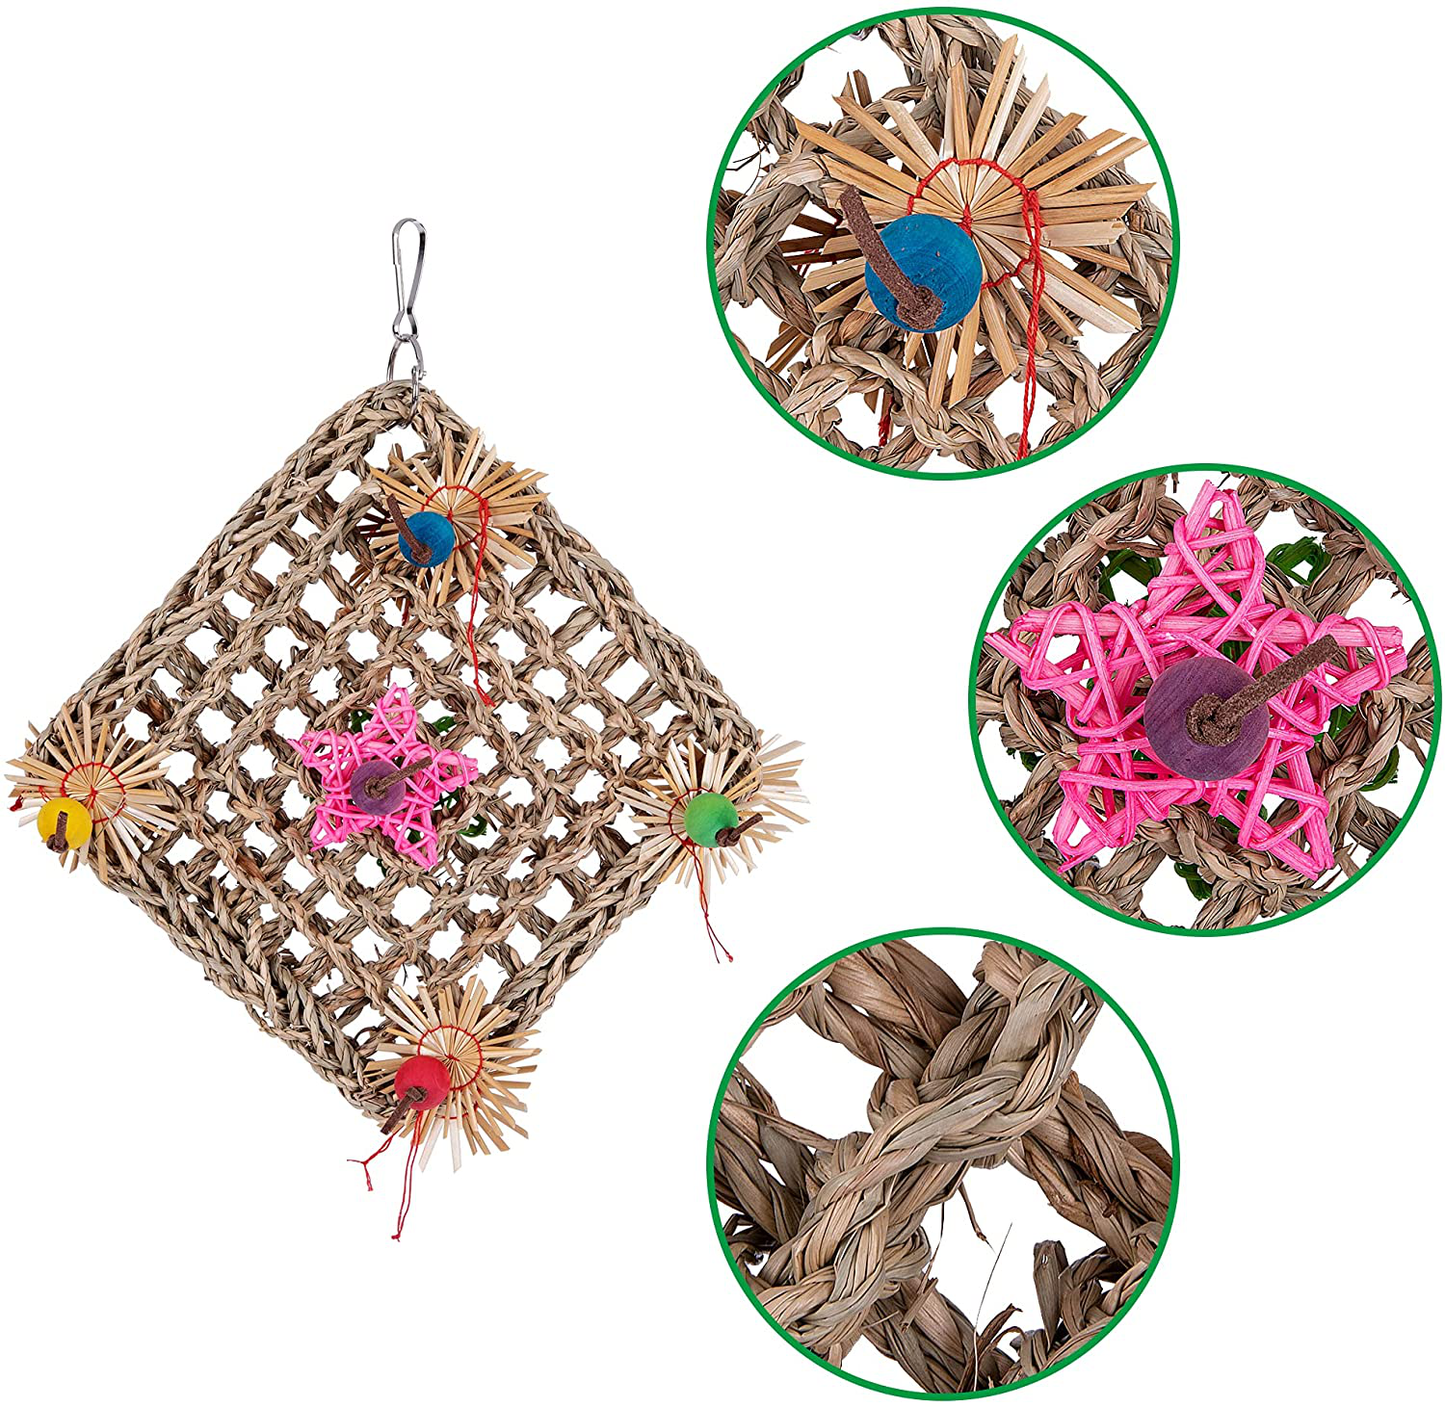 Kewkont Bird Parrot Toys,Seagrass Foraging Wall Toy for Birds，Suitable for Small Parakeets,Budgie,Macaws,Conures,Finches,Love Birds Animals & Pet Supplies > Pet Supplies > Bird Supplies > Bird Toys Kewkont   